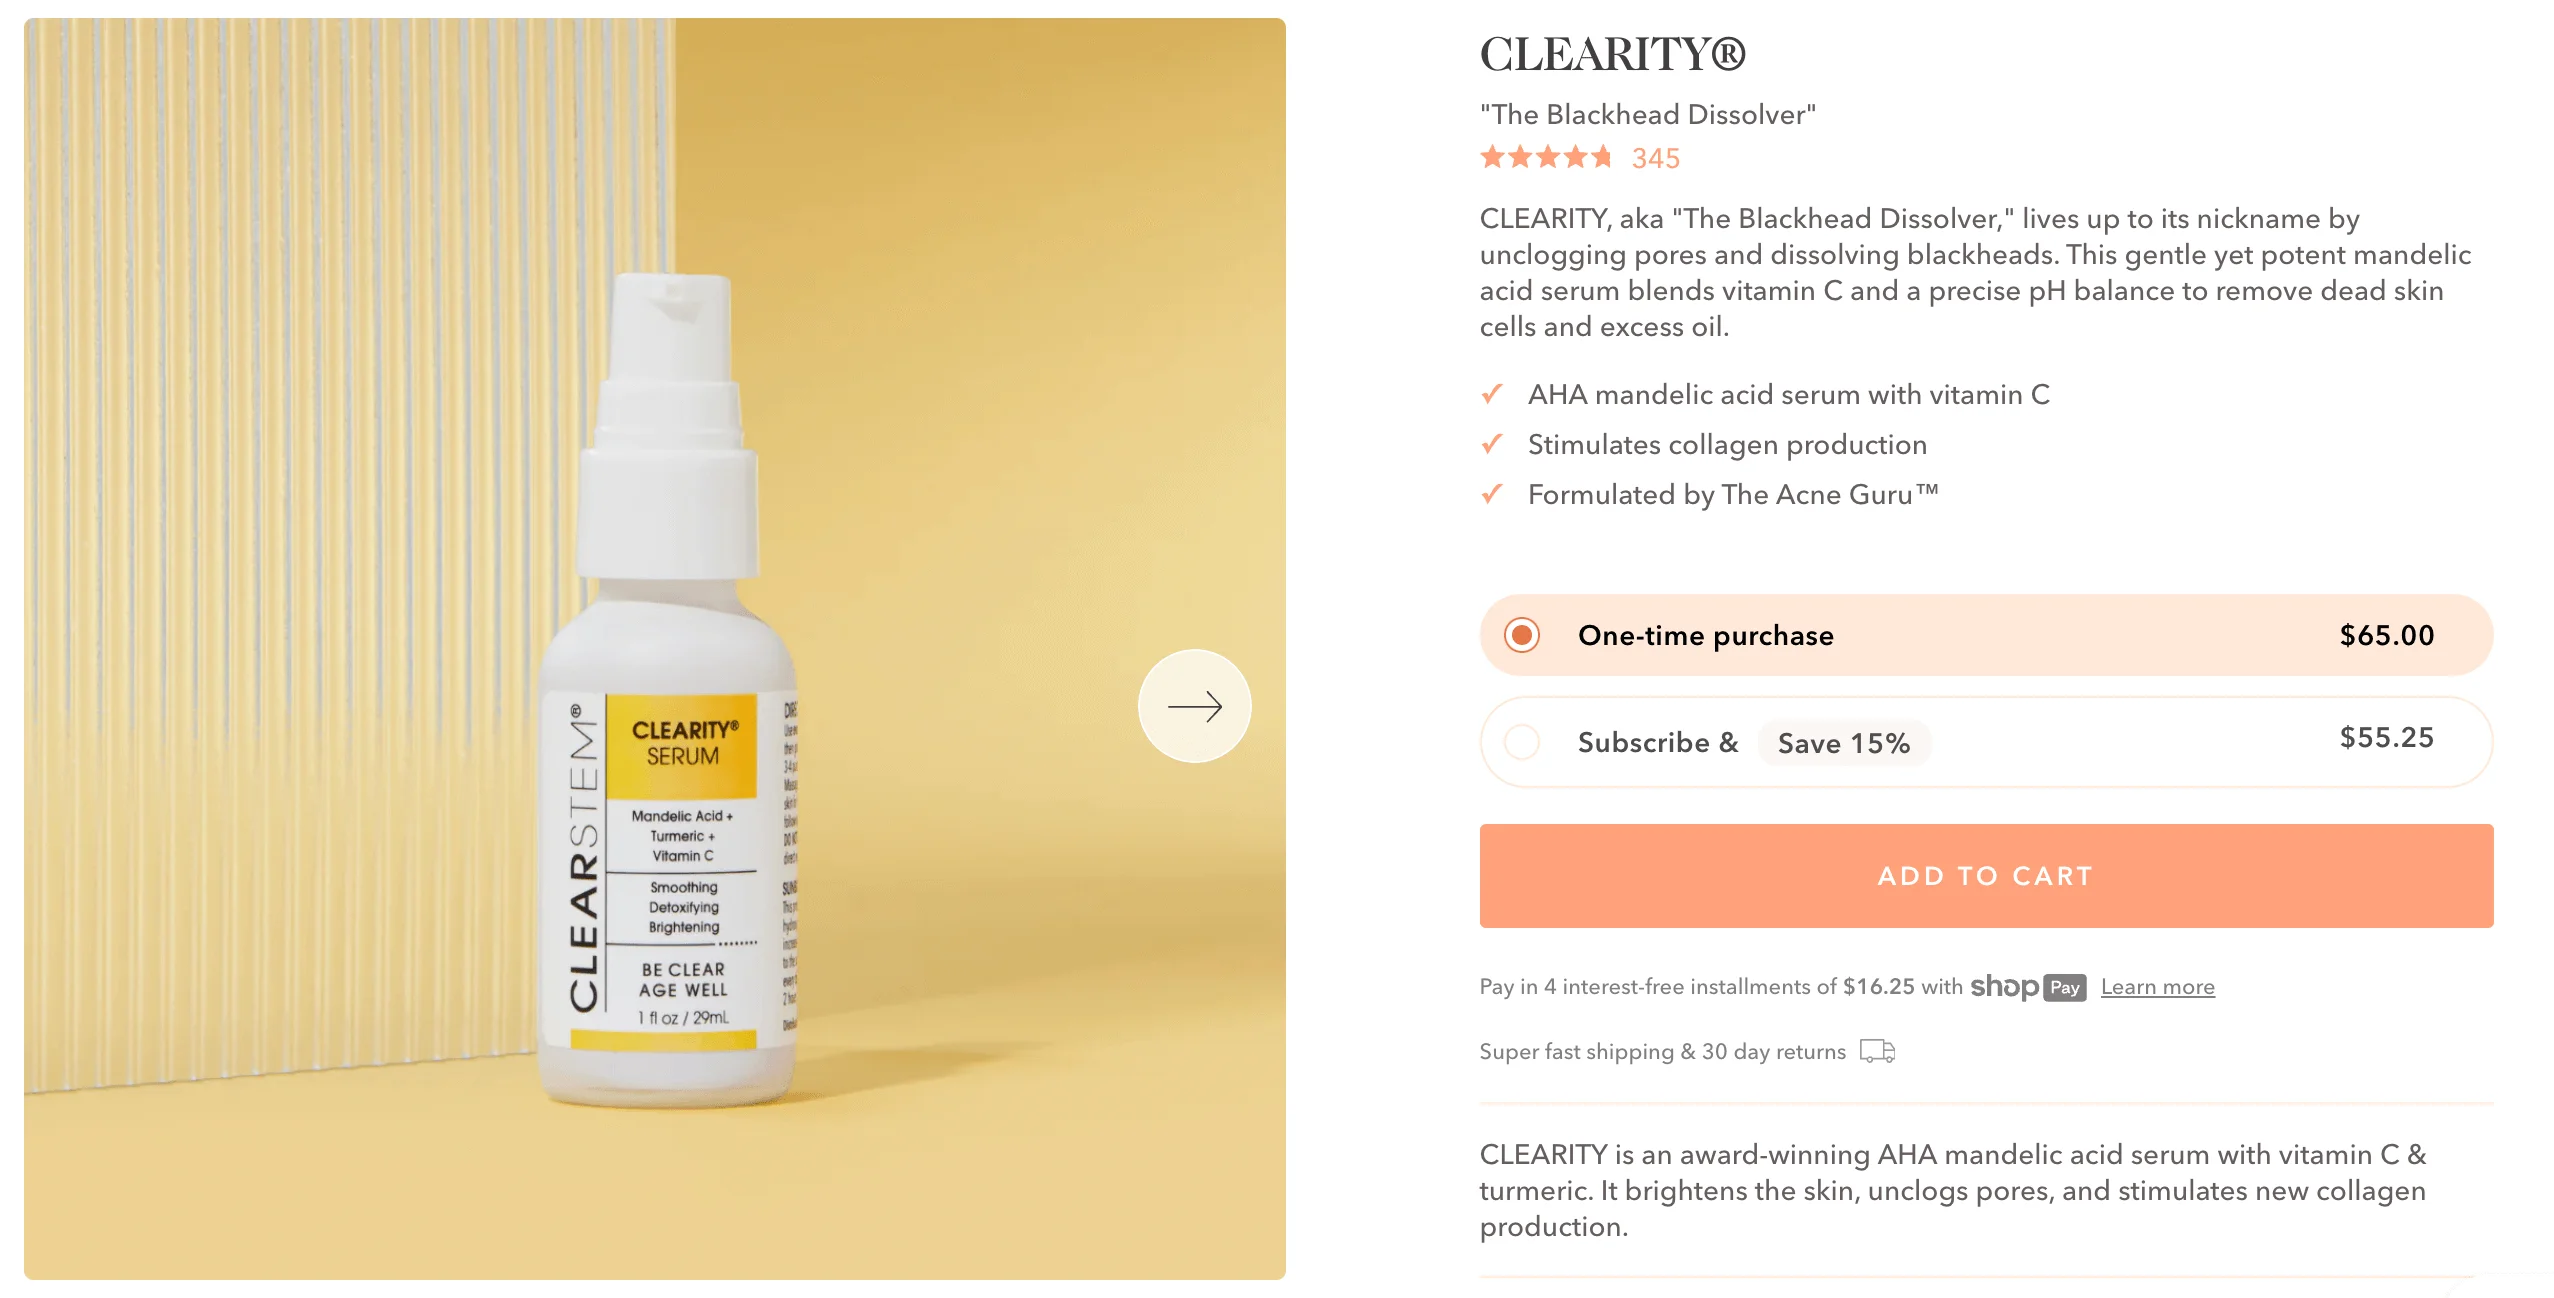 Clearity Serum product user experience